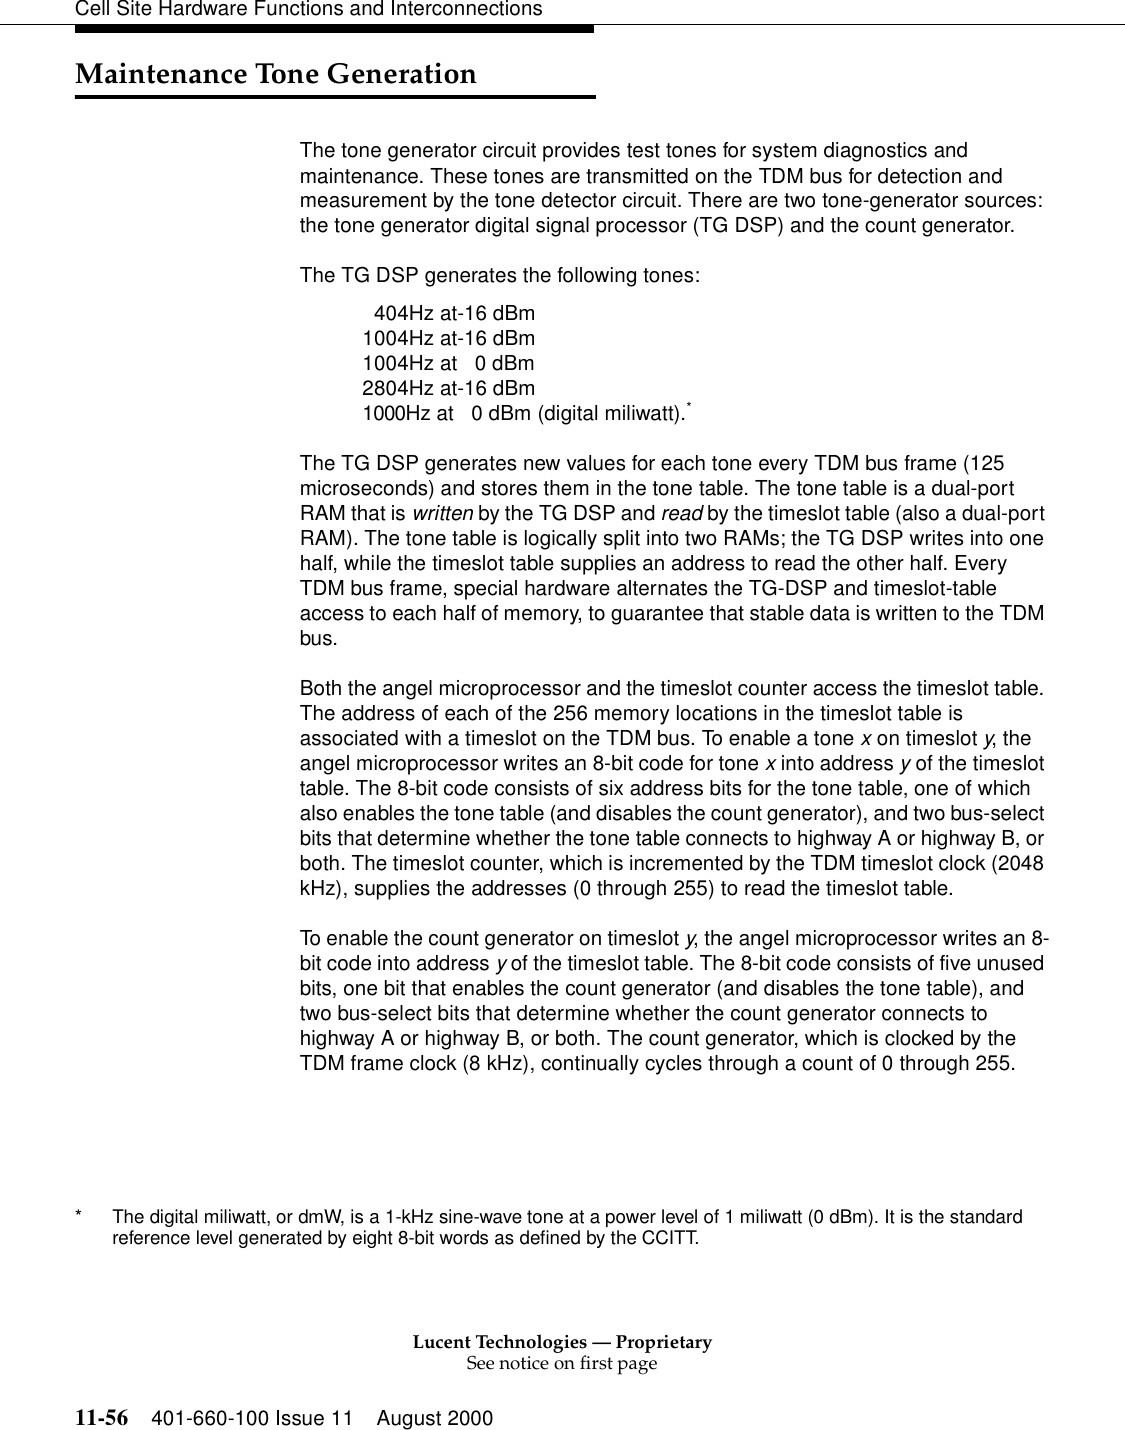 Lucent Technologies — ProprietarySee notice on first page11-56 401-660-100 Issue 11 August 2000Cell Site Hardware Functions and InterconnectionsMaintenance Tone GenerationThe tone generator circuit provides test tones for system diagnostics and maintenance. These tones are transmitted on the TDM bus for detection and measurement by the tone detector circuit. There are two tone-generator sources: the tone generator digital signal processor (TG DSP) and the count generator.The TG DSP generates the following tones:404Hz at-16 dBm1004Hz at-16 dBm1004Hz at 0 dBm2804Hz at-16 dBm1000Hz at 0 dBm (digital miliwatt).*The TG DSP generates new values for each tone every TDM bus frame (125 microseconds) and stores them in the tone table. The tone table is a dual-port RAM that is written by the TG DSP and read by the timeslot table (also a dual-port RAM). The tone table is logically split into two RAMs; the TG DSP writes into one half, while the timeslot table supplies an address to read the other half. Every TDM bus frame, special hardware alternates the TG-DSP and timeslot-table access to each half of memory, to guarantee that stable data is written to the TDM bus.Both the angel microprocessor and the timeslot counter access the timeslot table. The address of each of the 256 memory locations in the timeslot table is associated with a timeslot on the TDM bus. To enable a tone x on timeslot y, the angel microprocessor writes an 8-bit code for tone x into address y of the timeslot table. The 8-bit code consists of six address bits for the tone table, one of which also enables the tone table (and disables the count generator), and two bus-select bits that determine whether the tone table connects to highway A or highway B, or both. The timeslot counter, which is incremented by the TDM timeslot clock (2048 kHz), supplies the addresses (0 through 255) to read the timeslot table.To enable the count generator on timeslot y, the angel microprocessor writes an 8-bit code into address y of the timeslot table. The 8-bit code consists of five unused bits, one bit that enables the count generator (and disables the tone table), and two bus-select bits that determine whether the count generator connects to highway A or highway B, or both. The count generator, which is clocked by the TDM frame clock (8 kHz), continually cycles through a count of 0 through 255.* The digital miliwatt, or dmW, is a 1-kHz sine-wave tone at a power level of 1 miliwatt (0 dBm). It is the standard reference level generated by eight 8-bit words as defined by the CCITT.